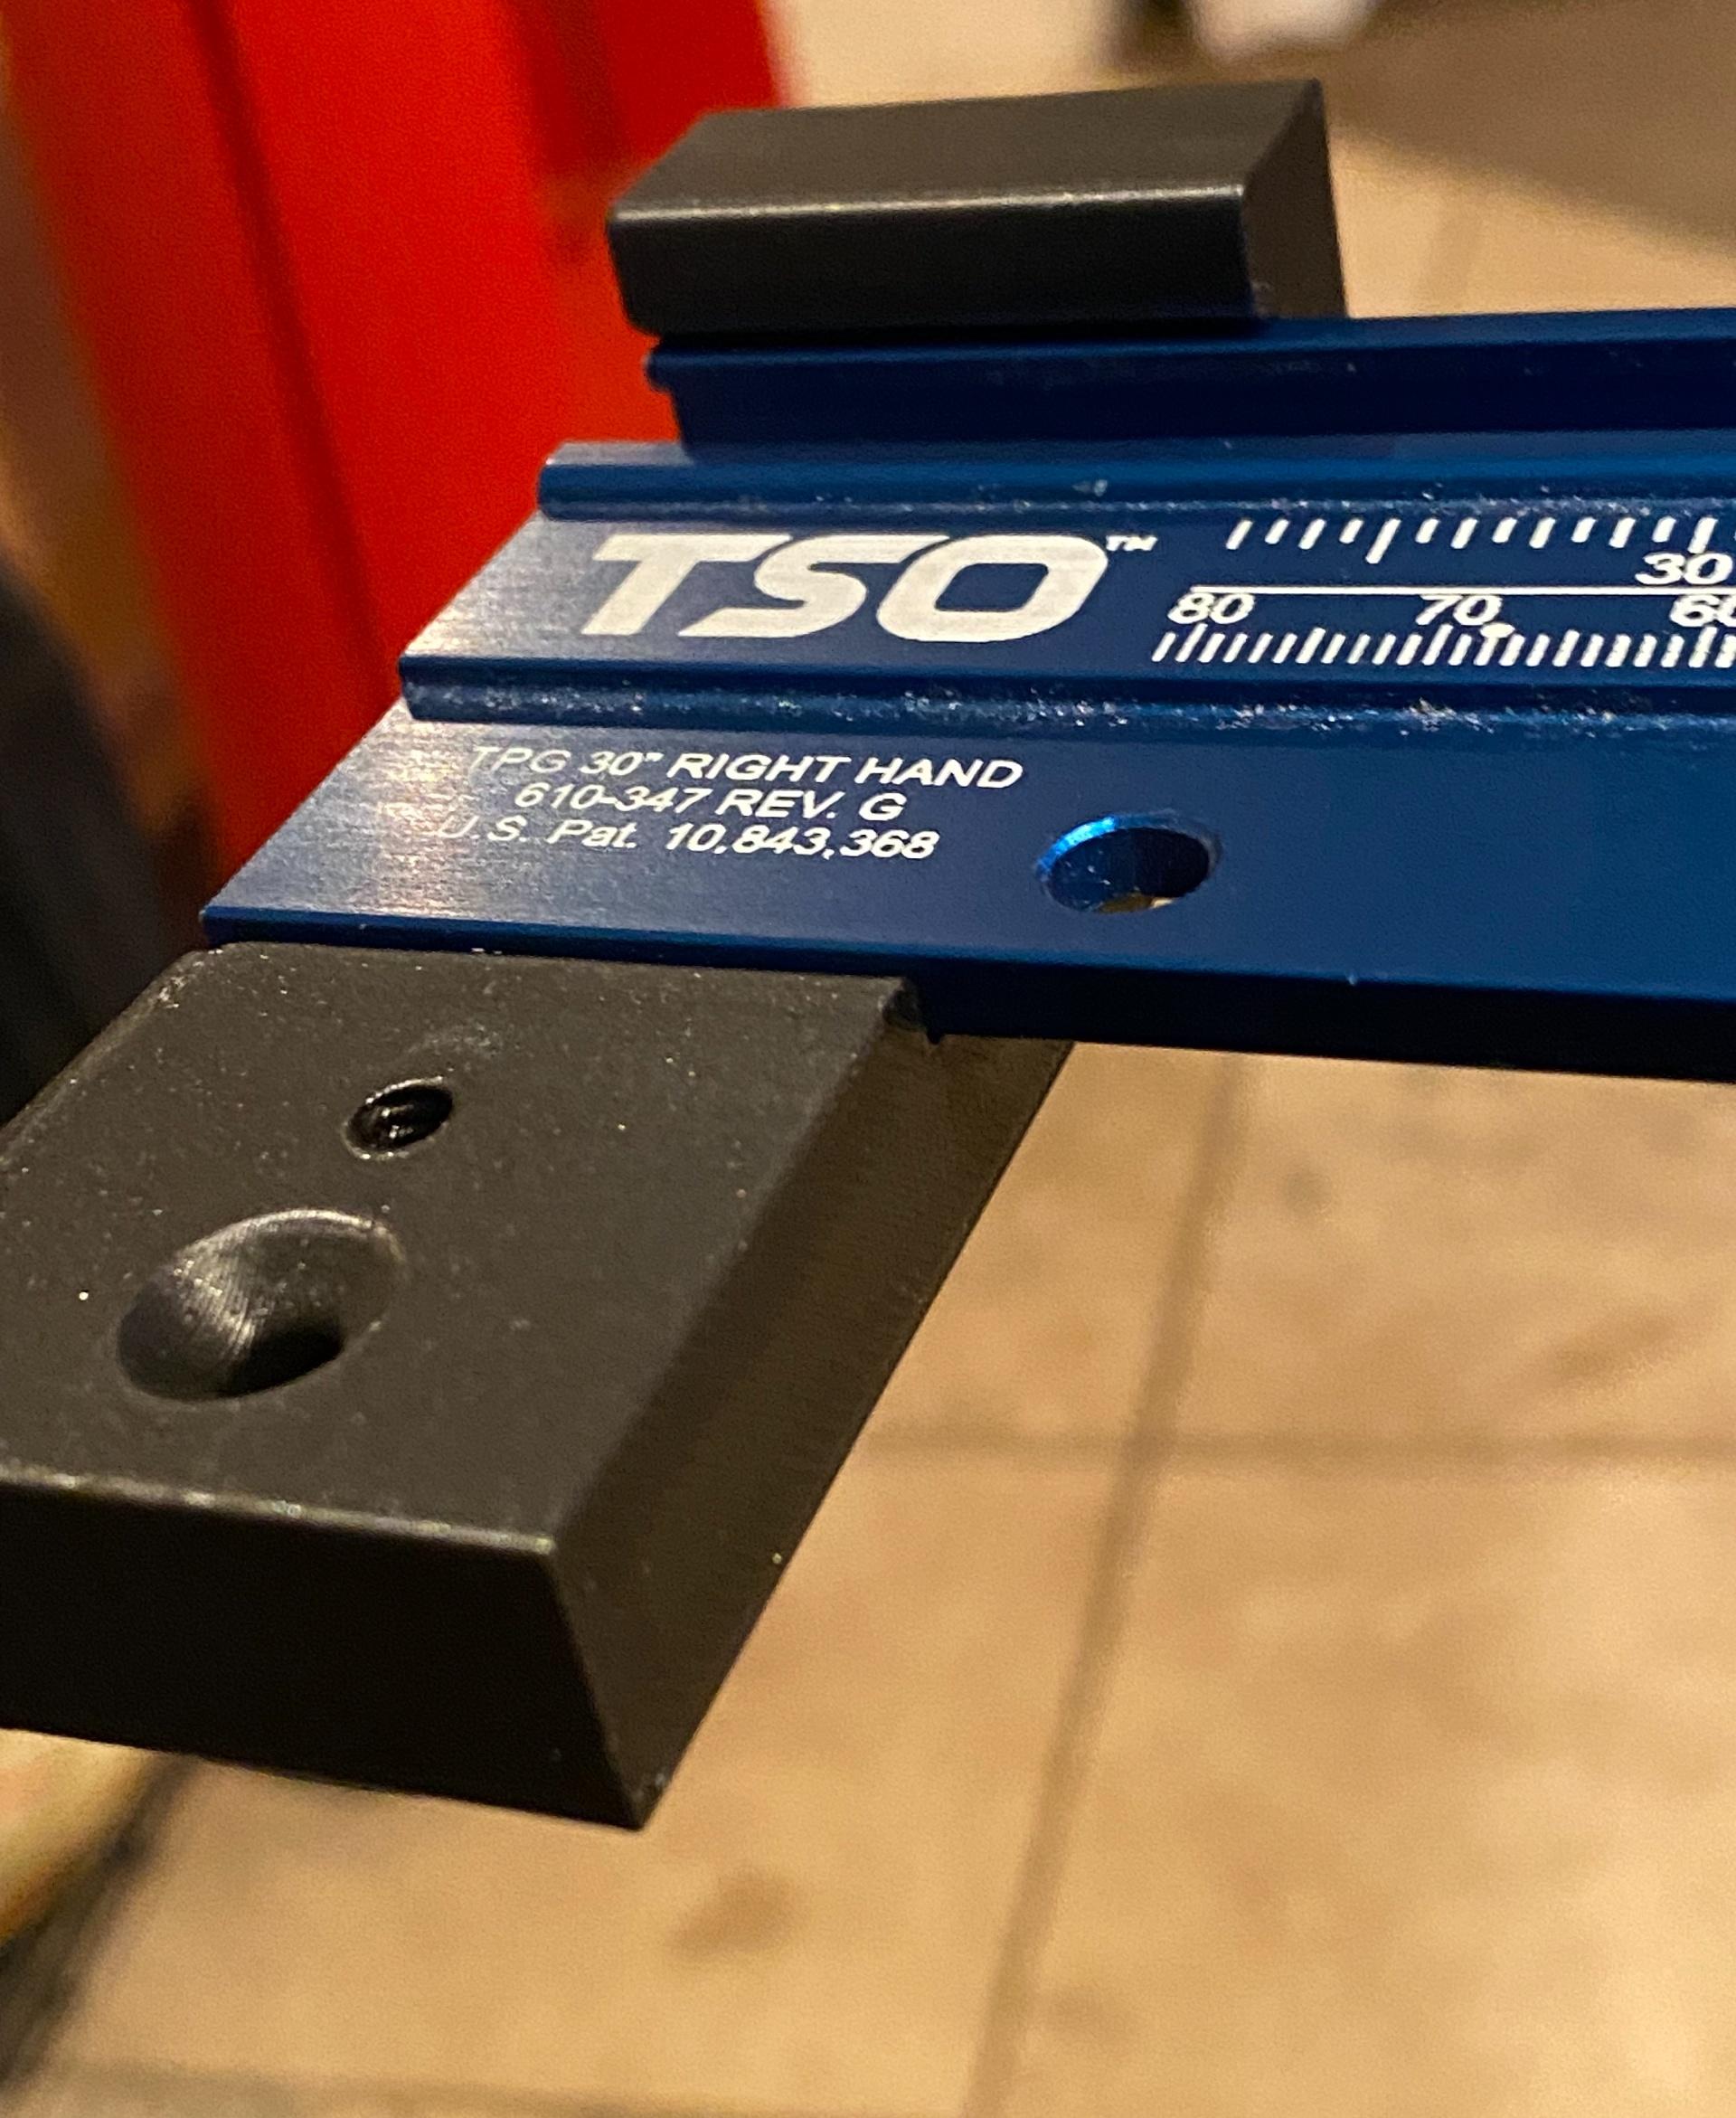 TSO Parallel Guide Holder - I refer to this part as the "base". The. "handle" is not shown. Note how it has a nice fit with a satisfying snap. - 3d model